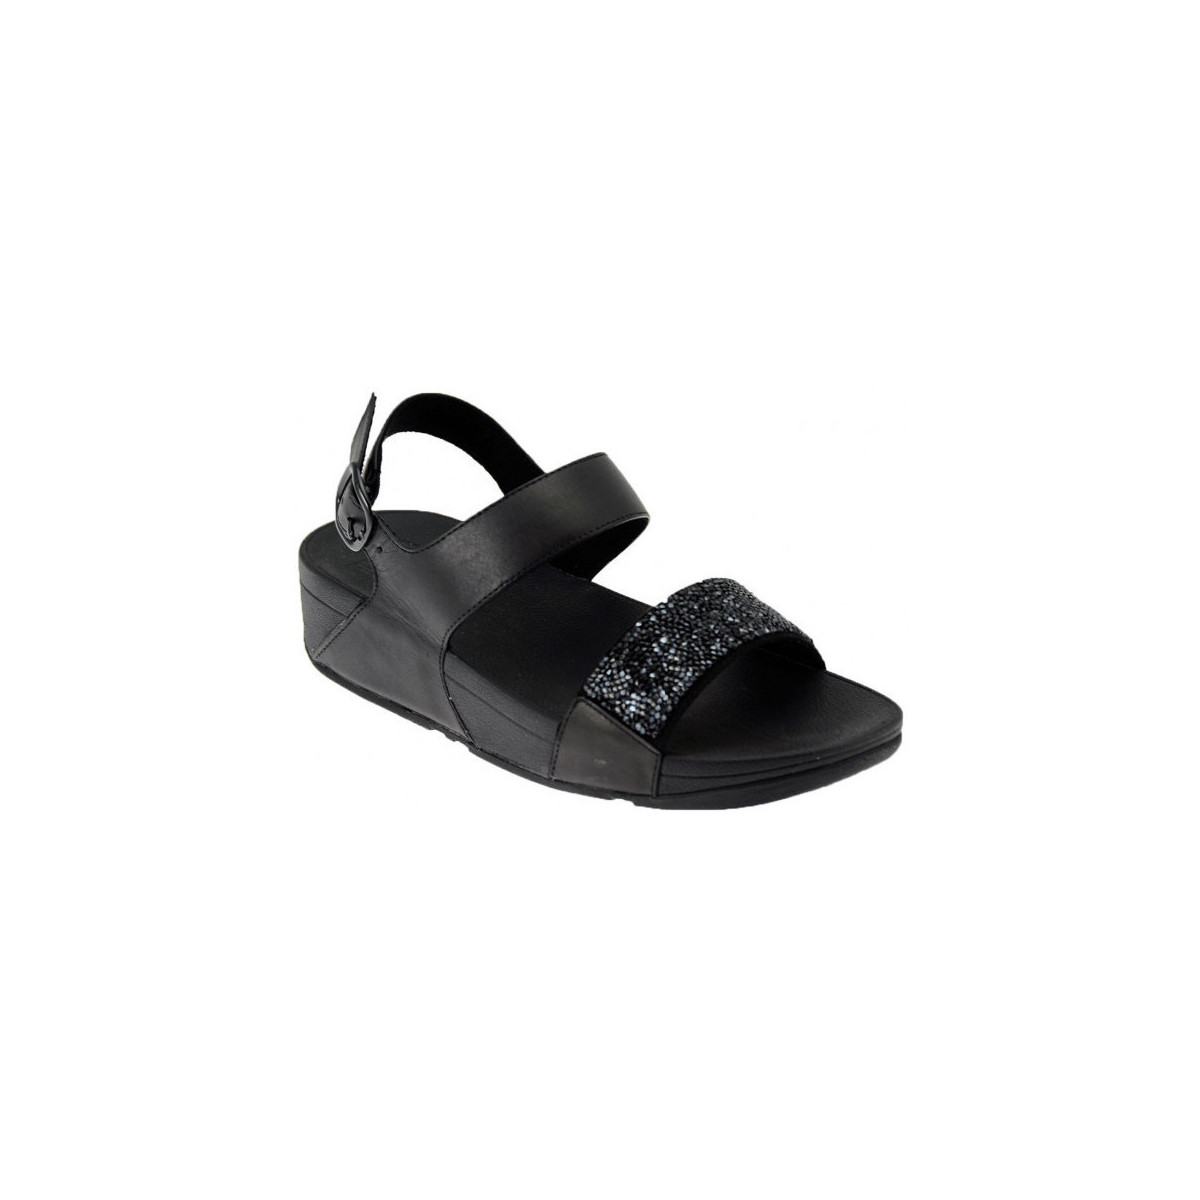 Zapatos Mujer Deportivas Moda FitFlop FitFlop SPARKLIE CRYSTAL SANDAL Negro